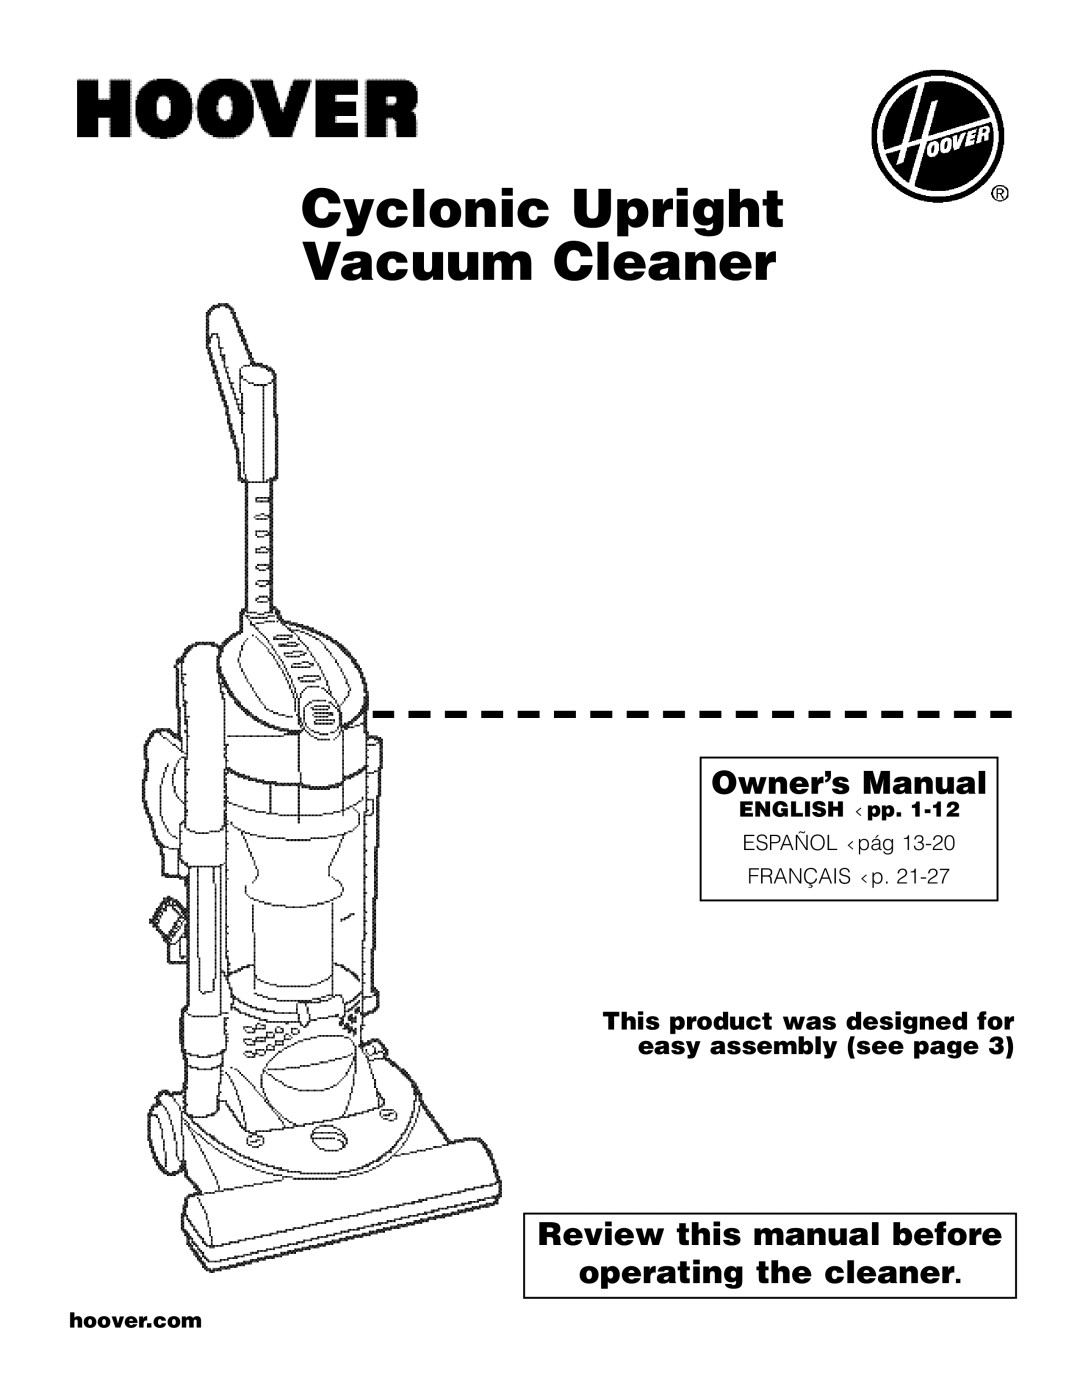 Hoover U5182900 owner manual Review this manual before Operating the cleaner, English ‹pp, Hoover.com 